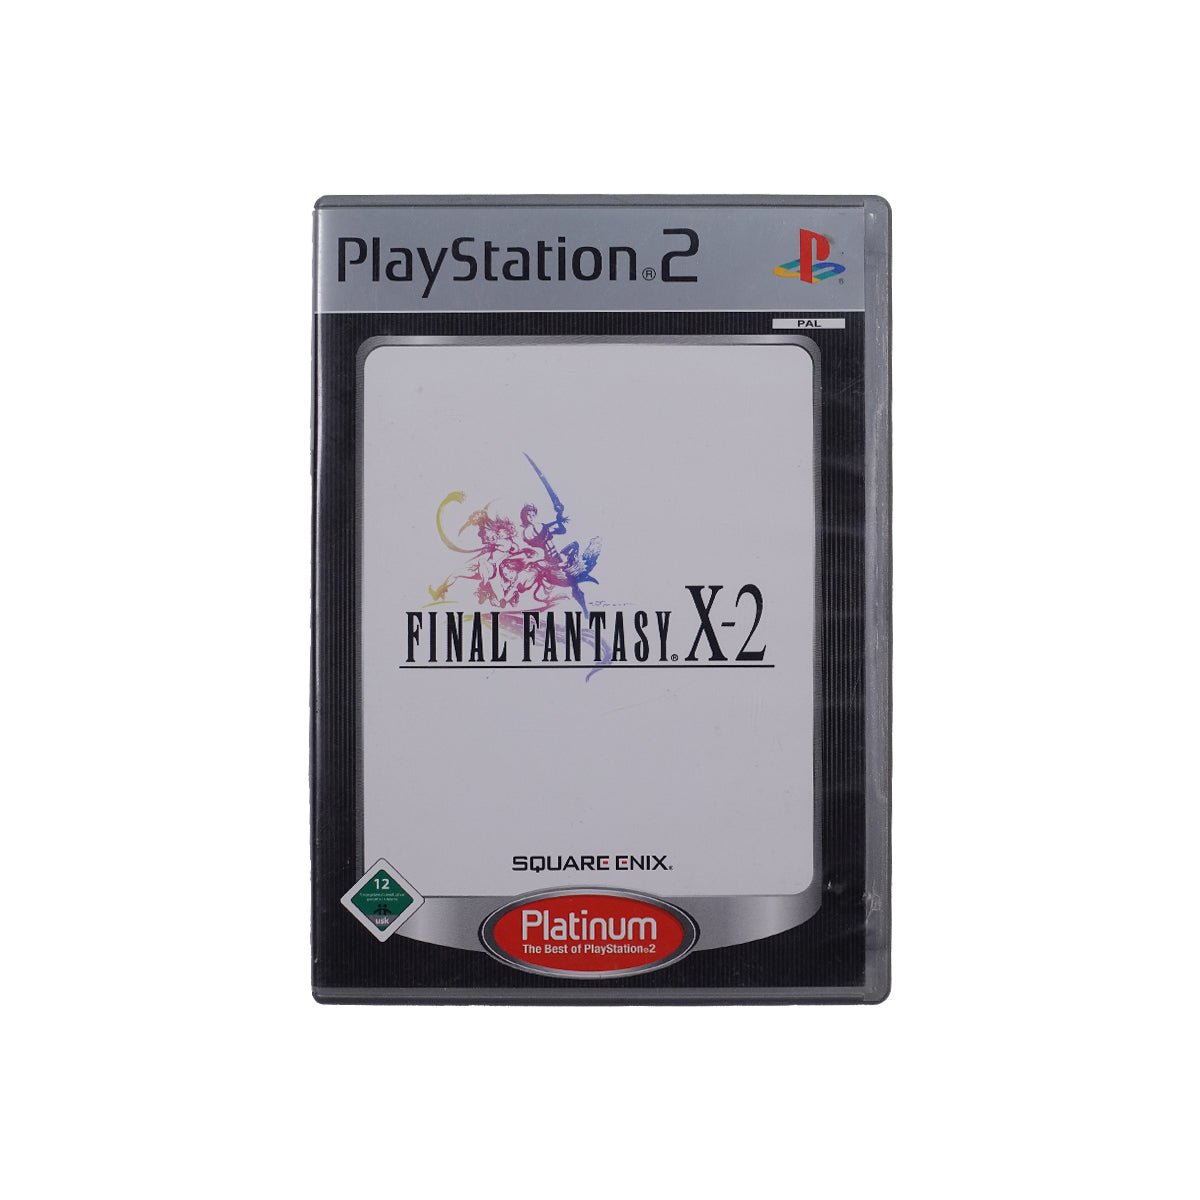 (Pre-Owned) Final Fantasy X-2 - PlayStation 2 - ريترو - Store 974 | ستور ٩٧٤